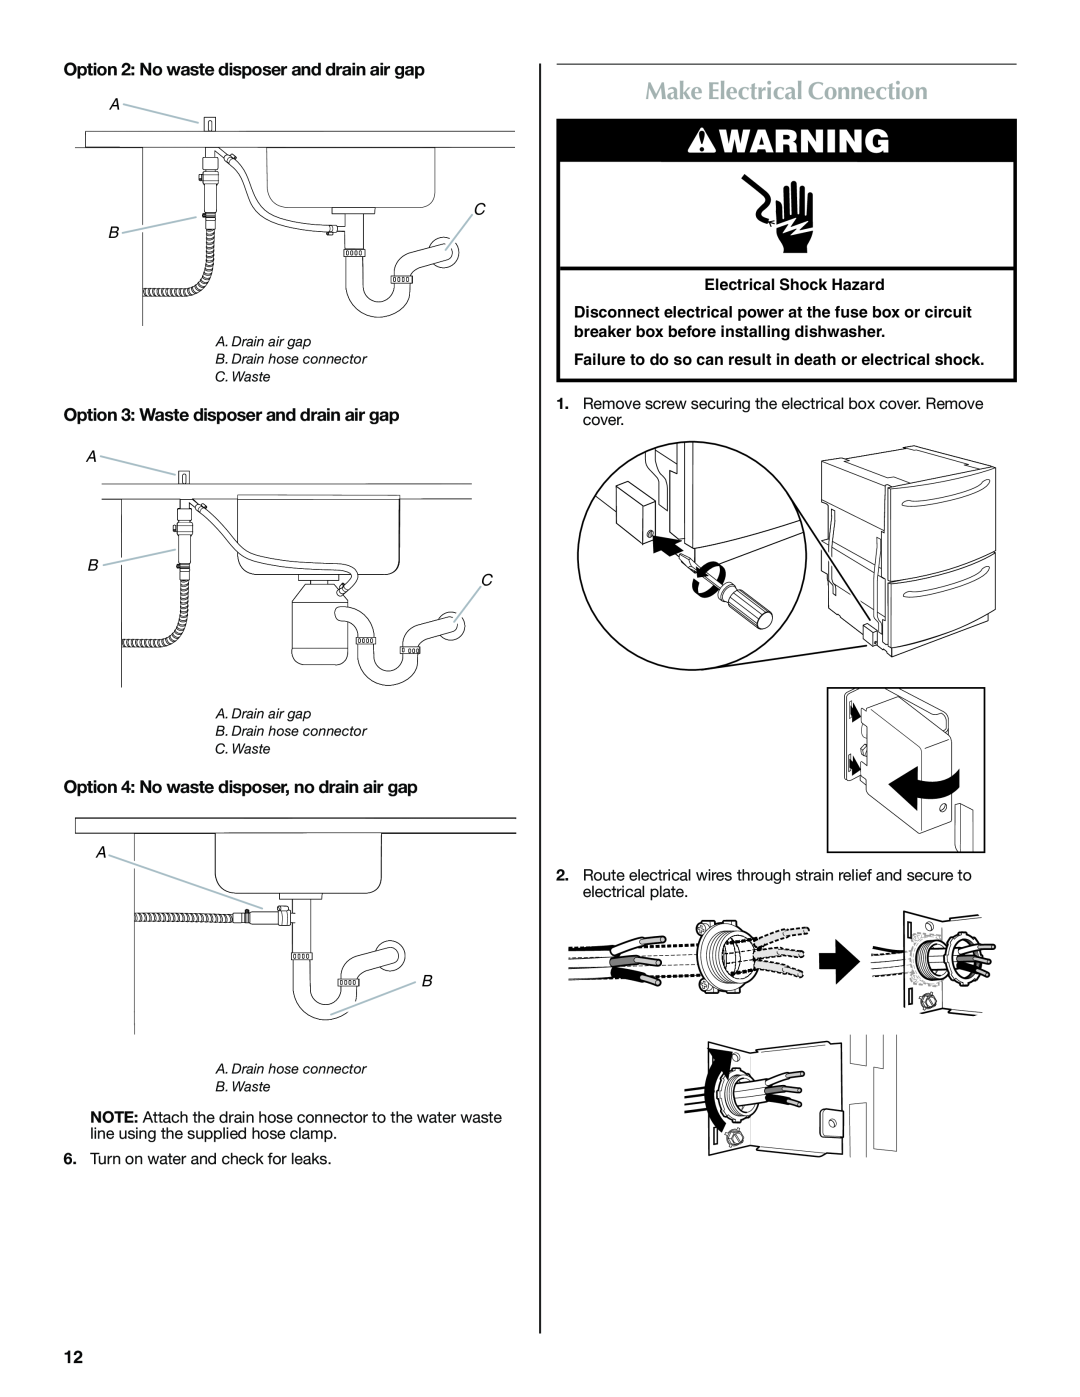 Maytag W10300218A installation instructions Make Electrical Connection, Option 2 No waste disposer and drain air gap, A B C 